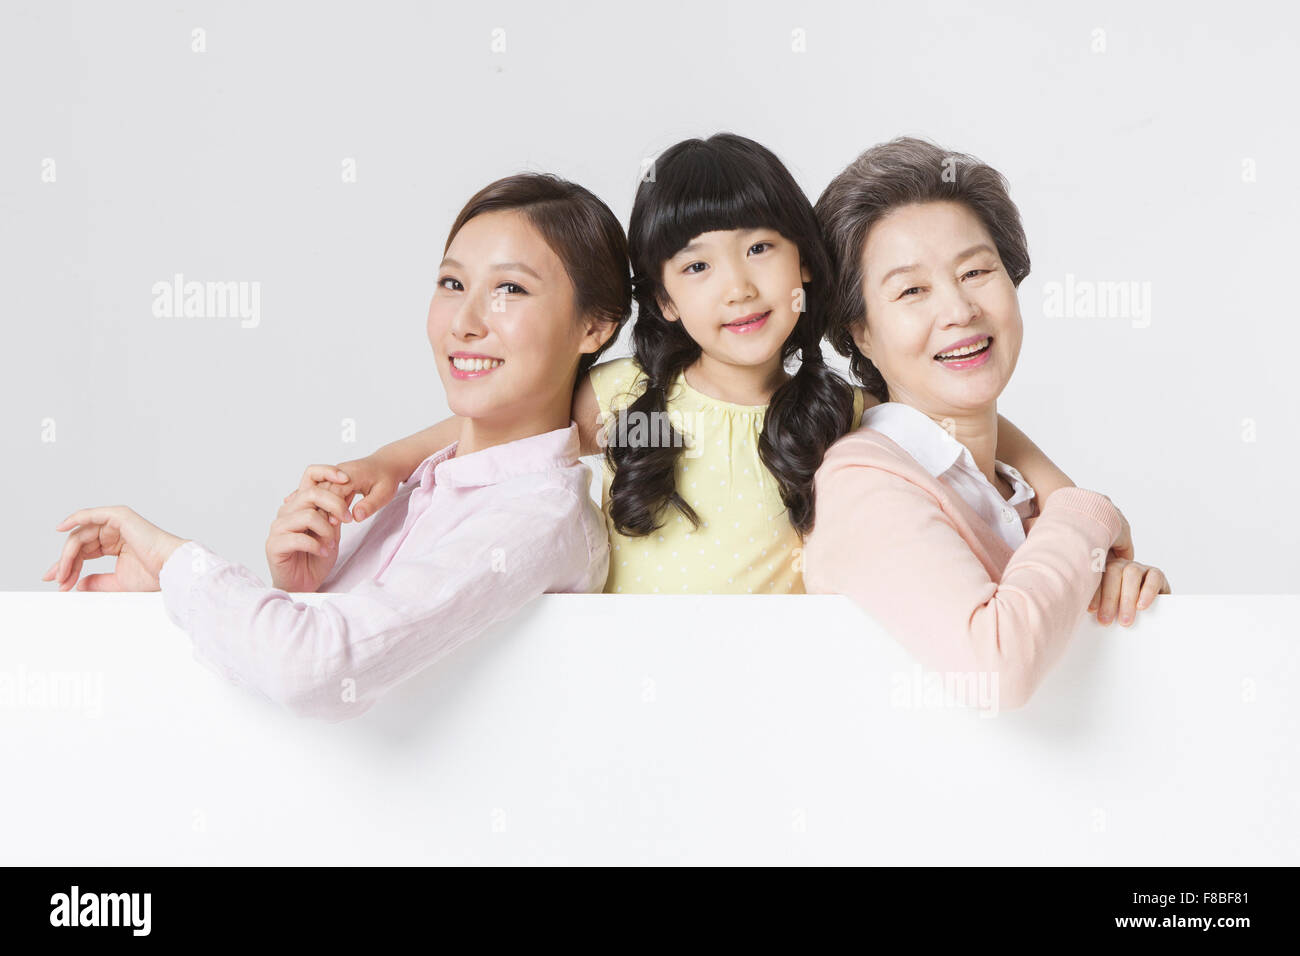 Mother, daughter, and grandmother together with white copy space under them Stock Photo